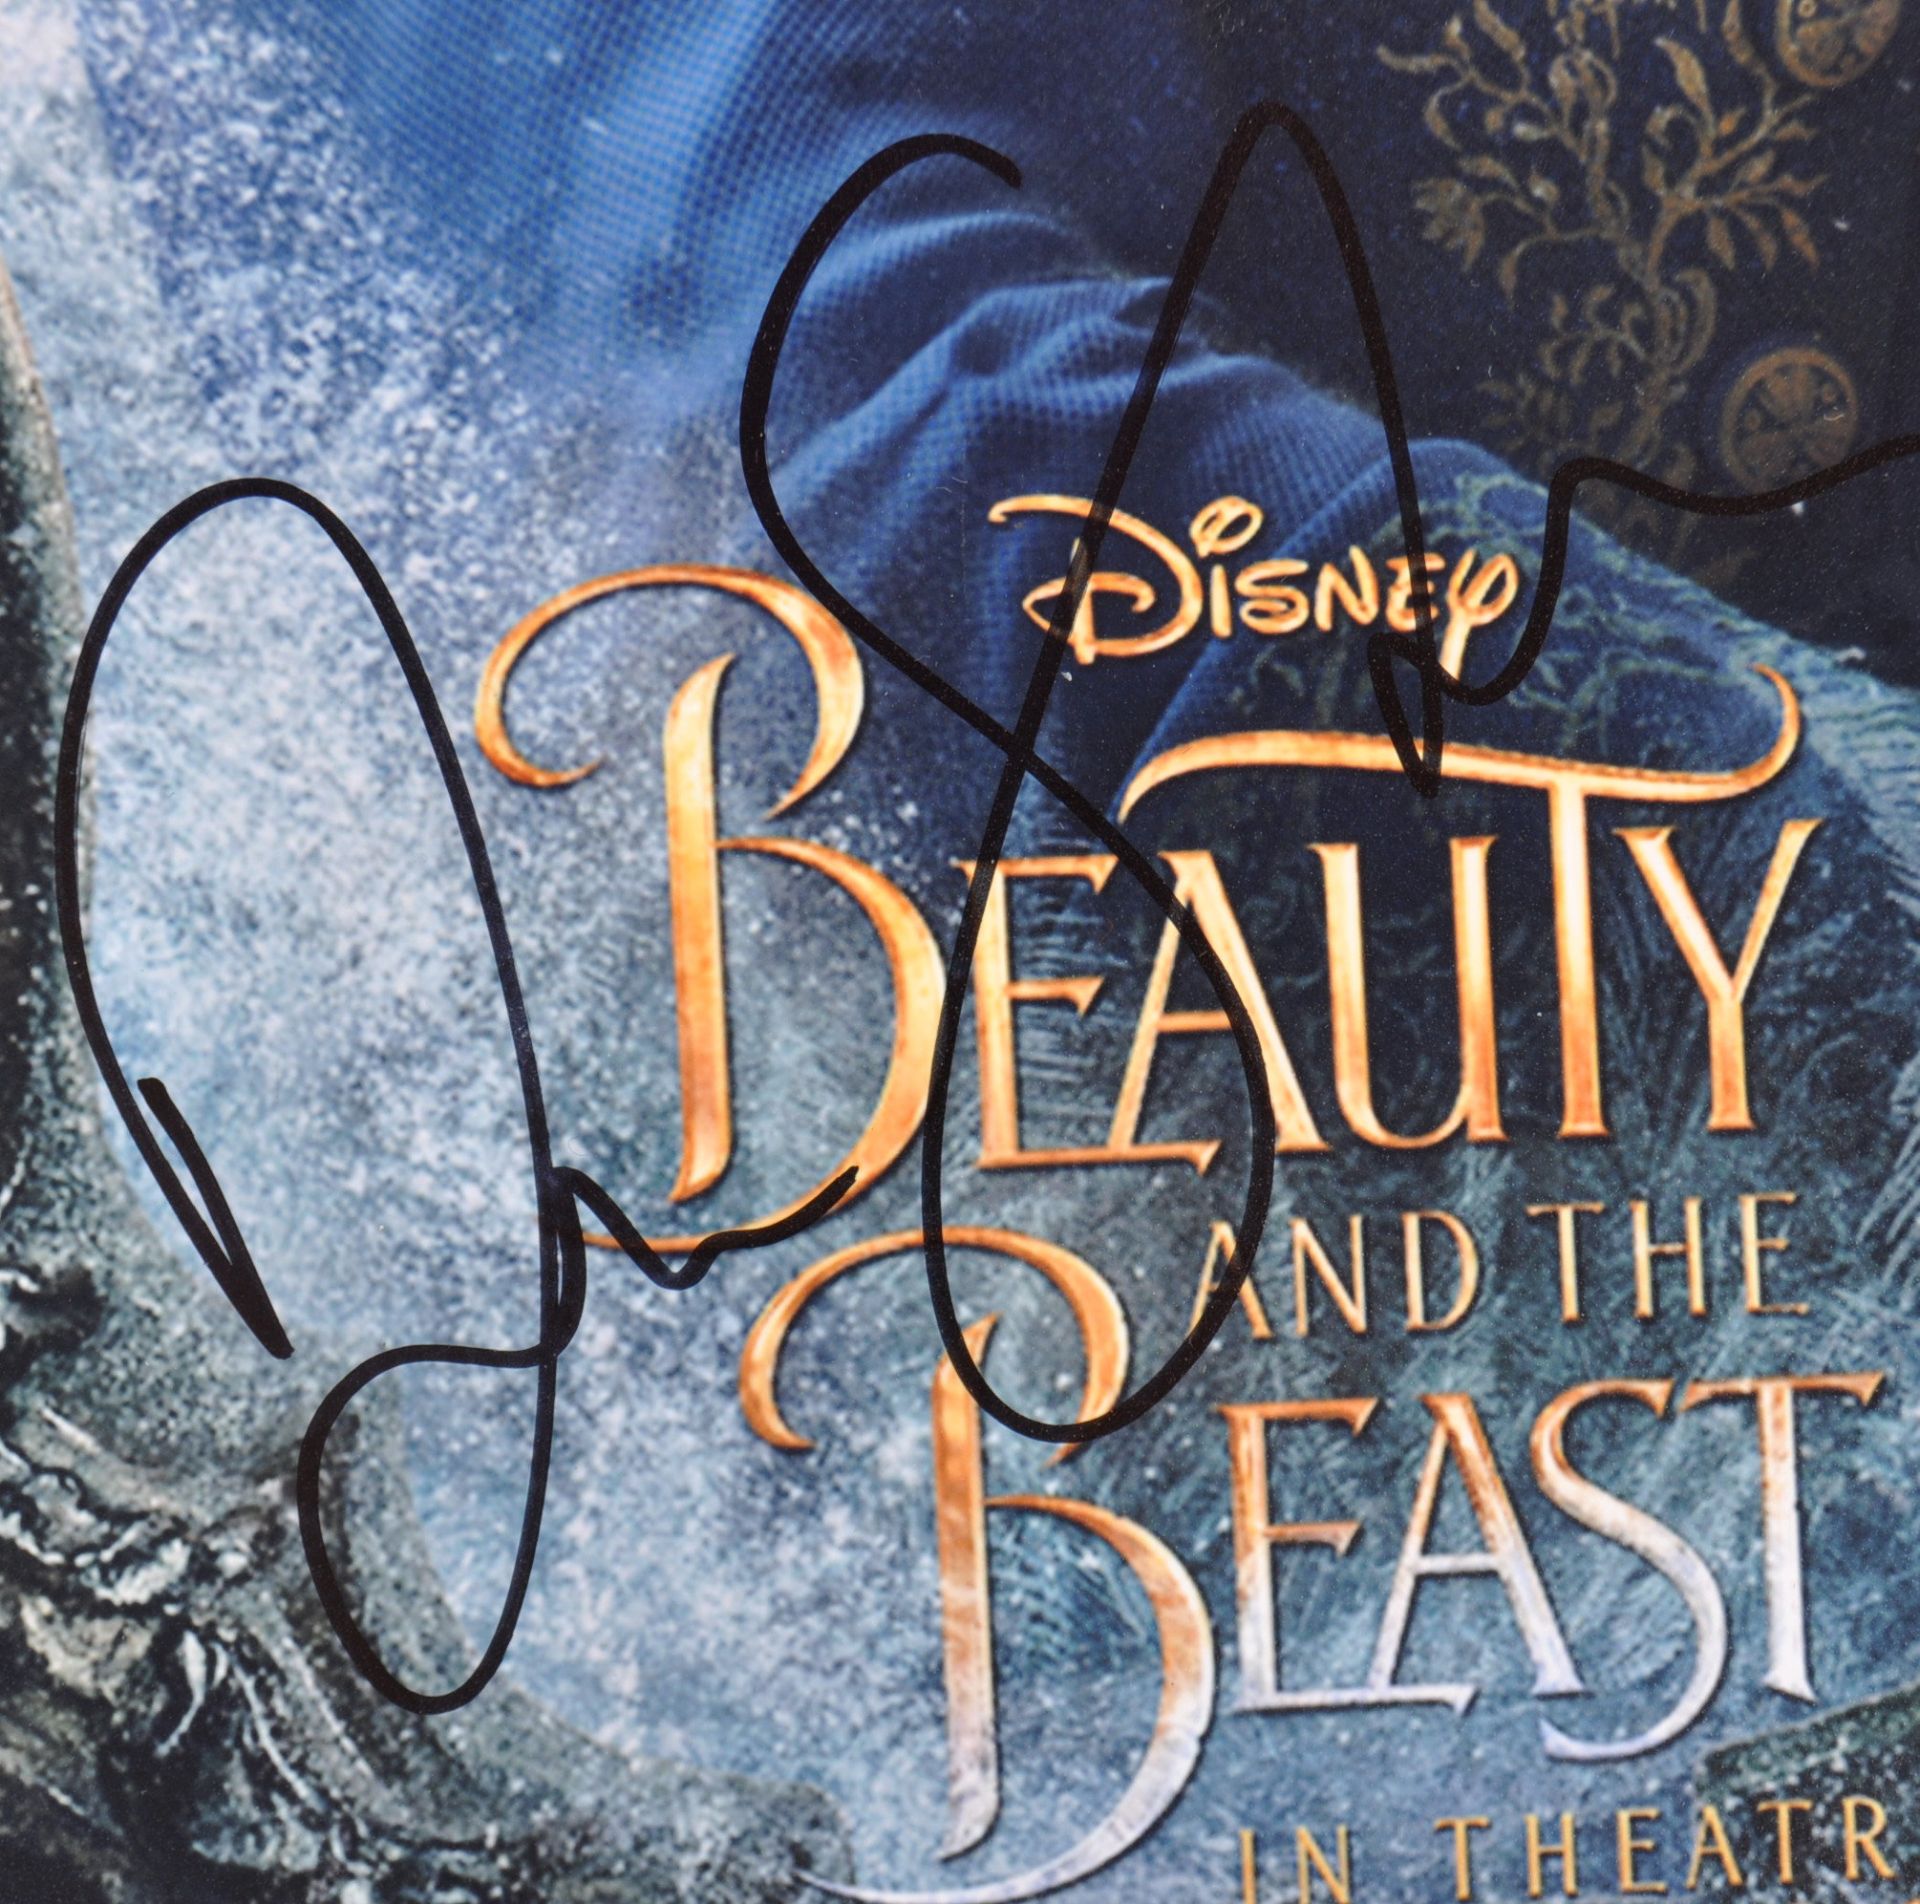 DISNEY - BEAUTY AND THE BEAST - DAN STEVENS - SIGNED PHOTOGRAPH - Image 2 of 2